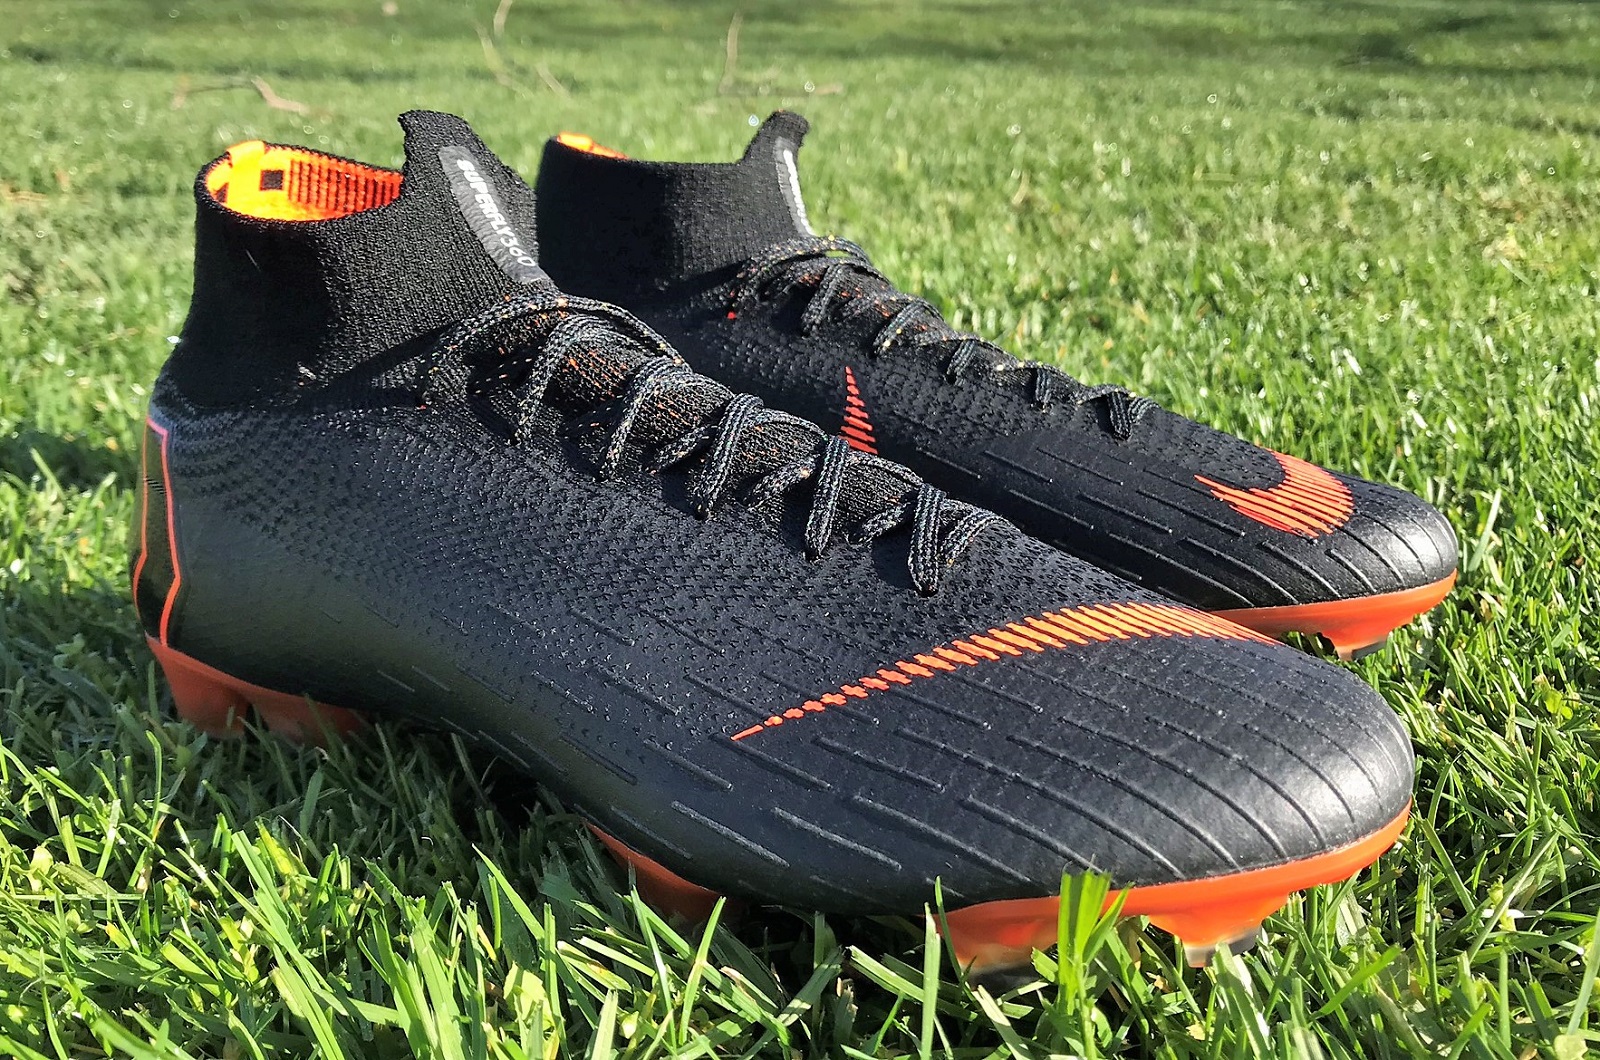 Nike Mercurial Superfly 360 Elite Review | Soccer Cleats 101